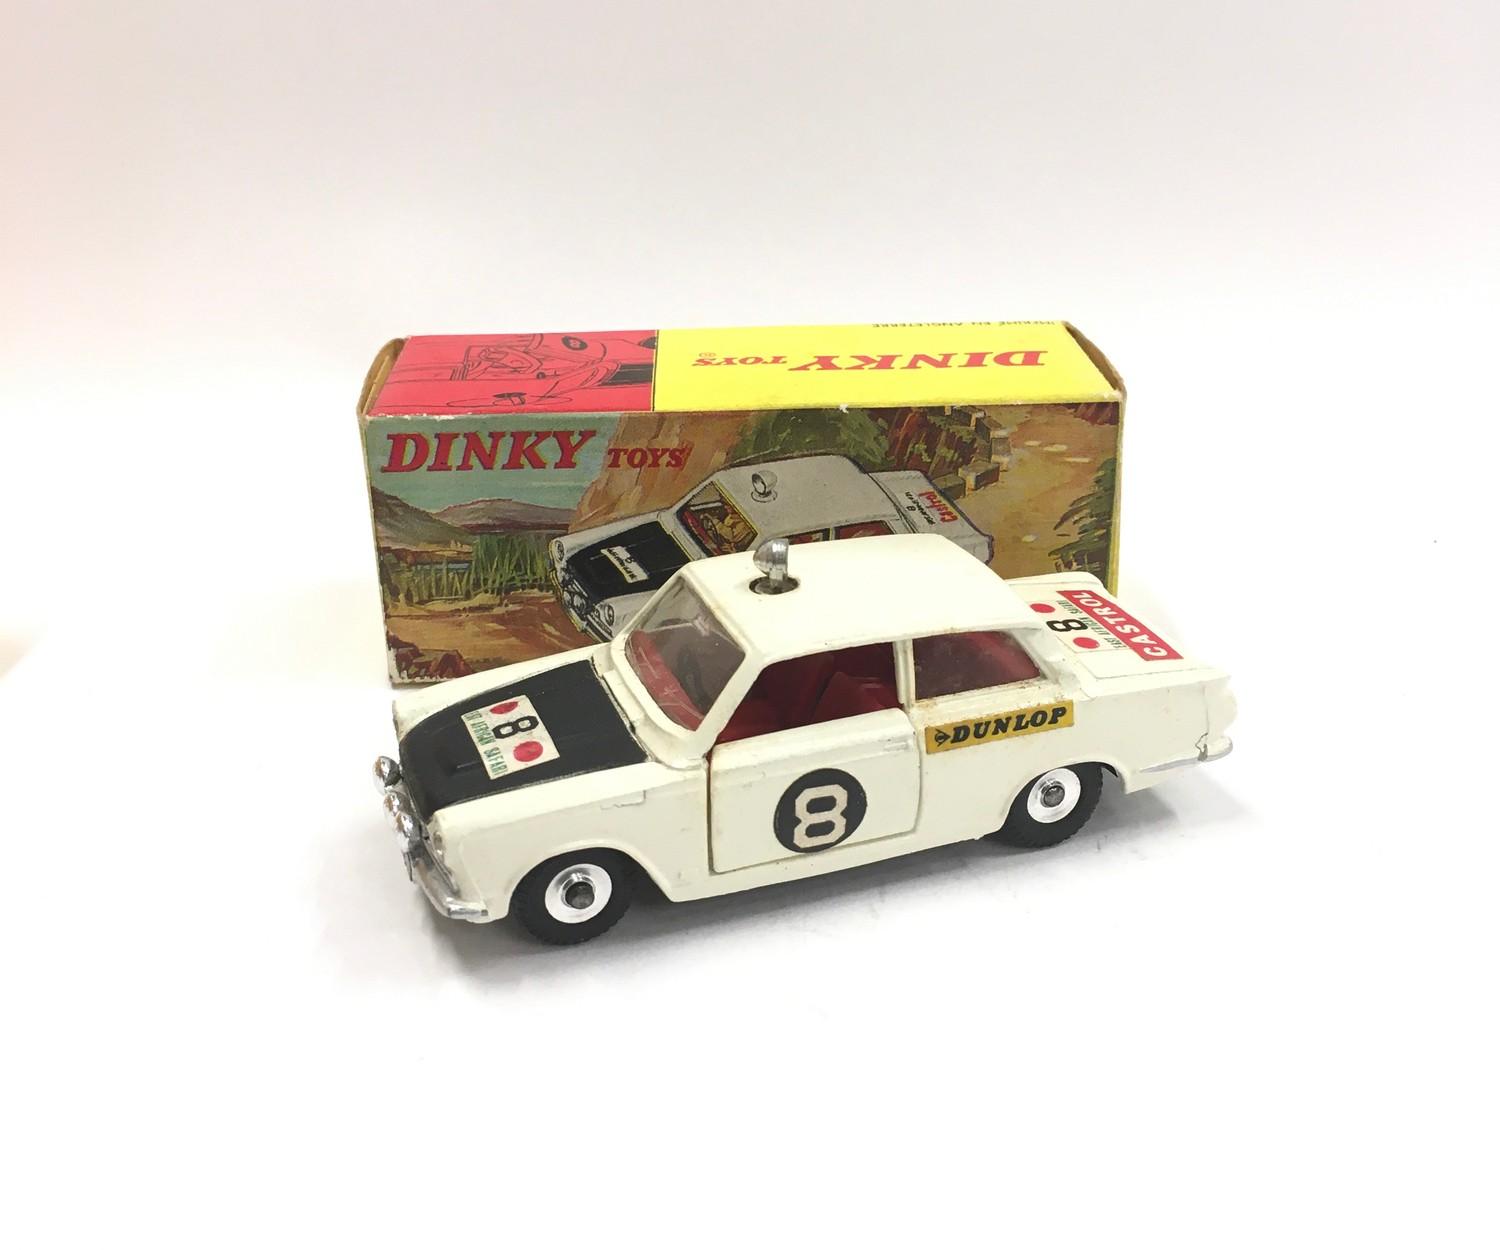 Dinky 212 Ford Cortina Rally Car - off white body, black bonnet, red interior, chrome roof light and